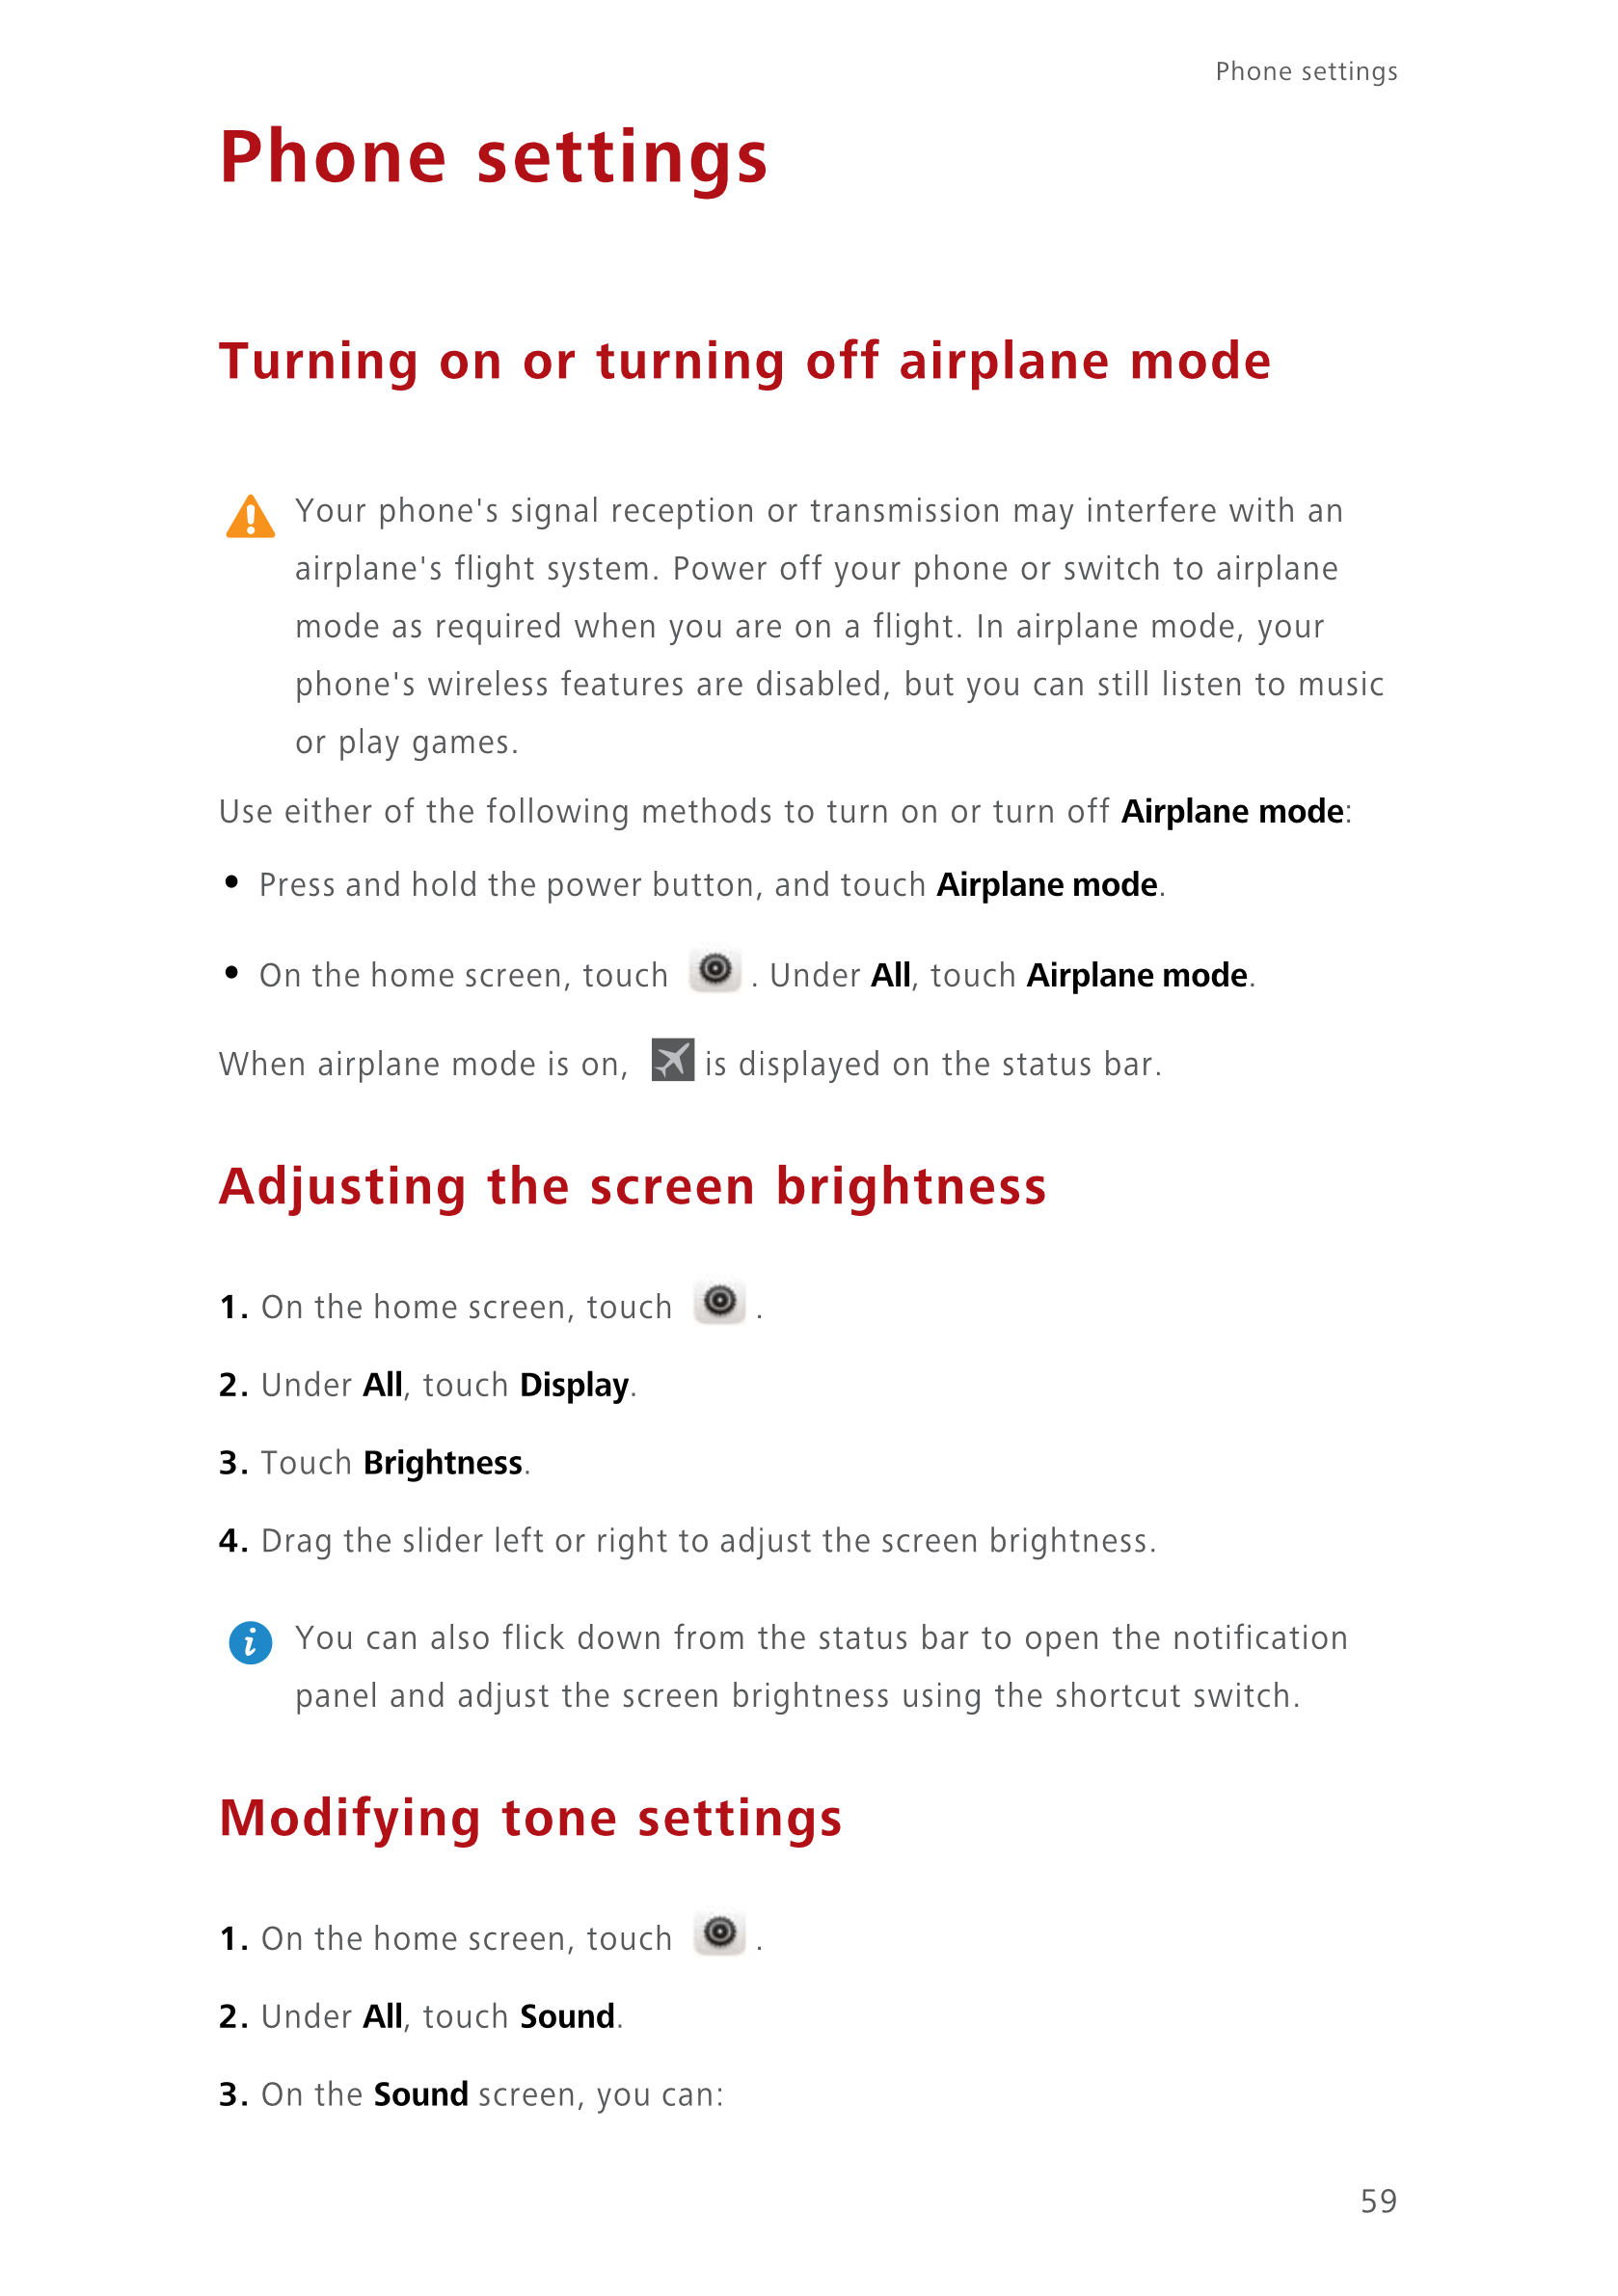 Phone settings 
Phone settings
Turning on or turning off airplane mode
Your phone's signal reception or transmission may interfe